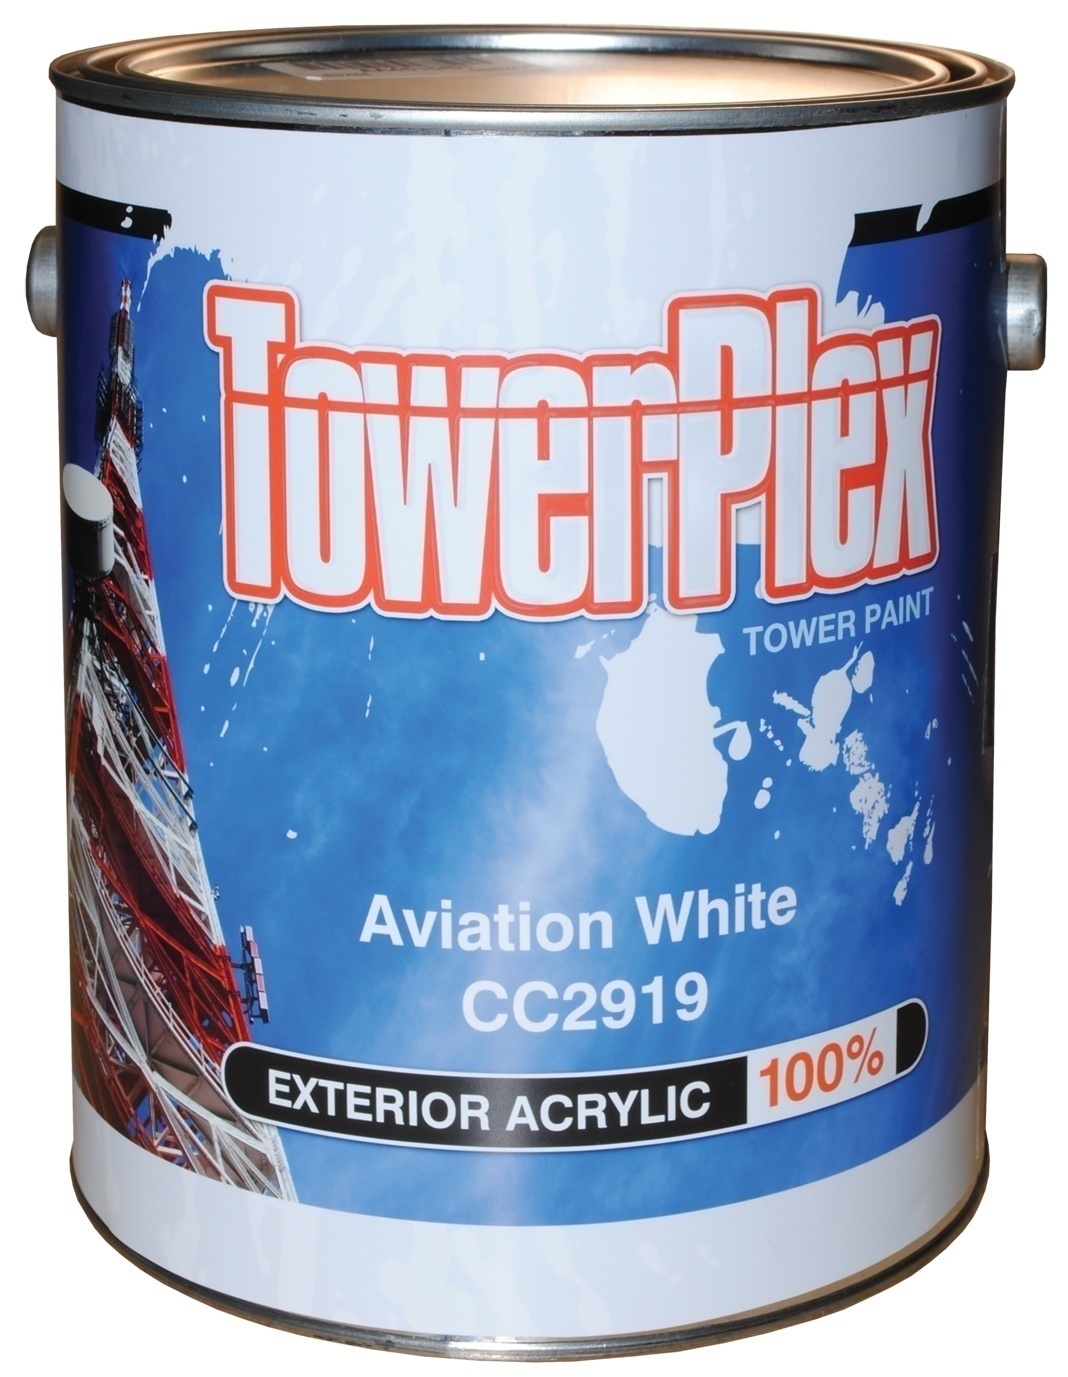 CC2919 TowerPlex Aviation White Tower Paint (5 Gallons) from GME Supply